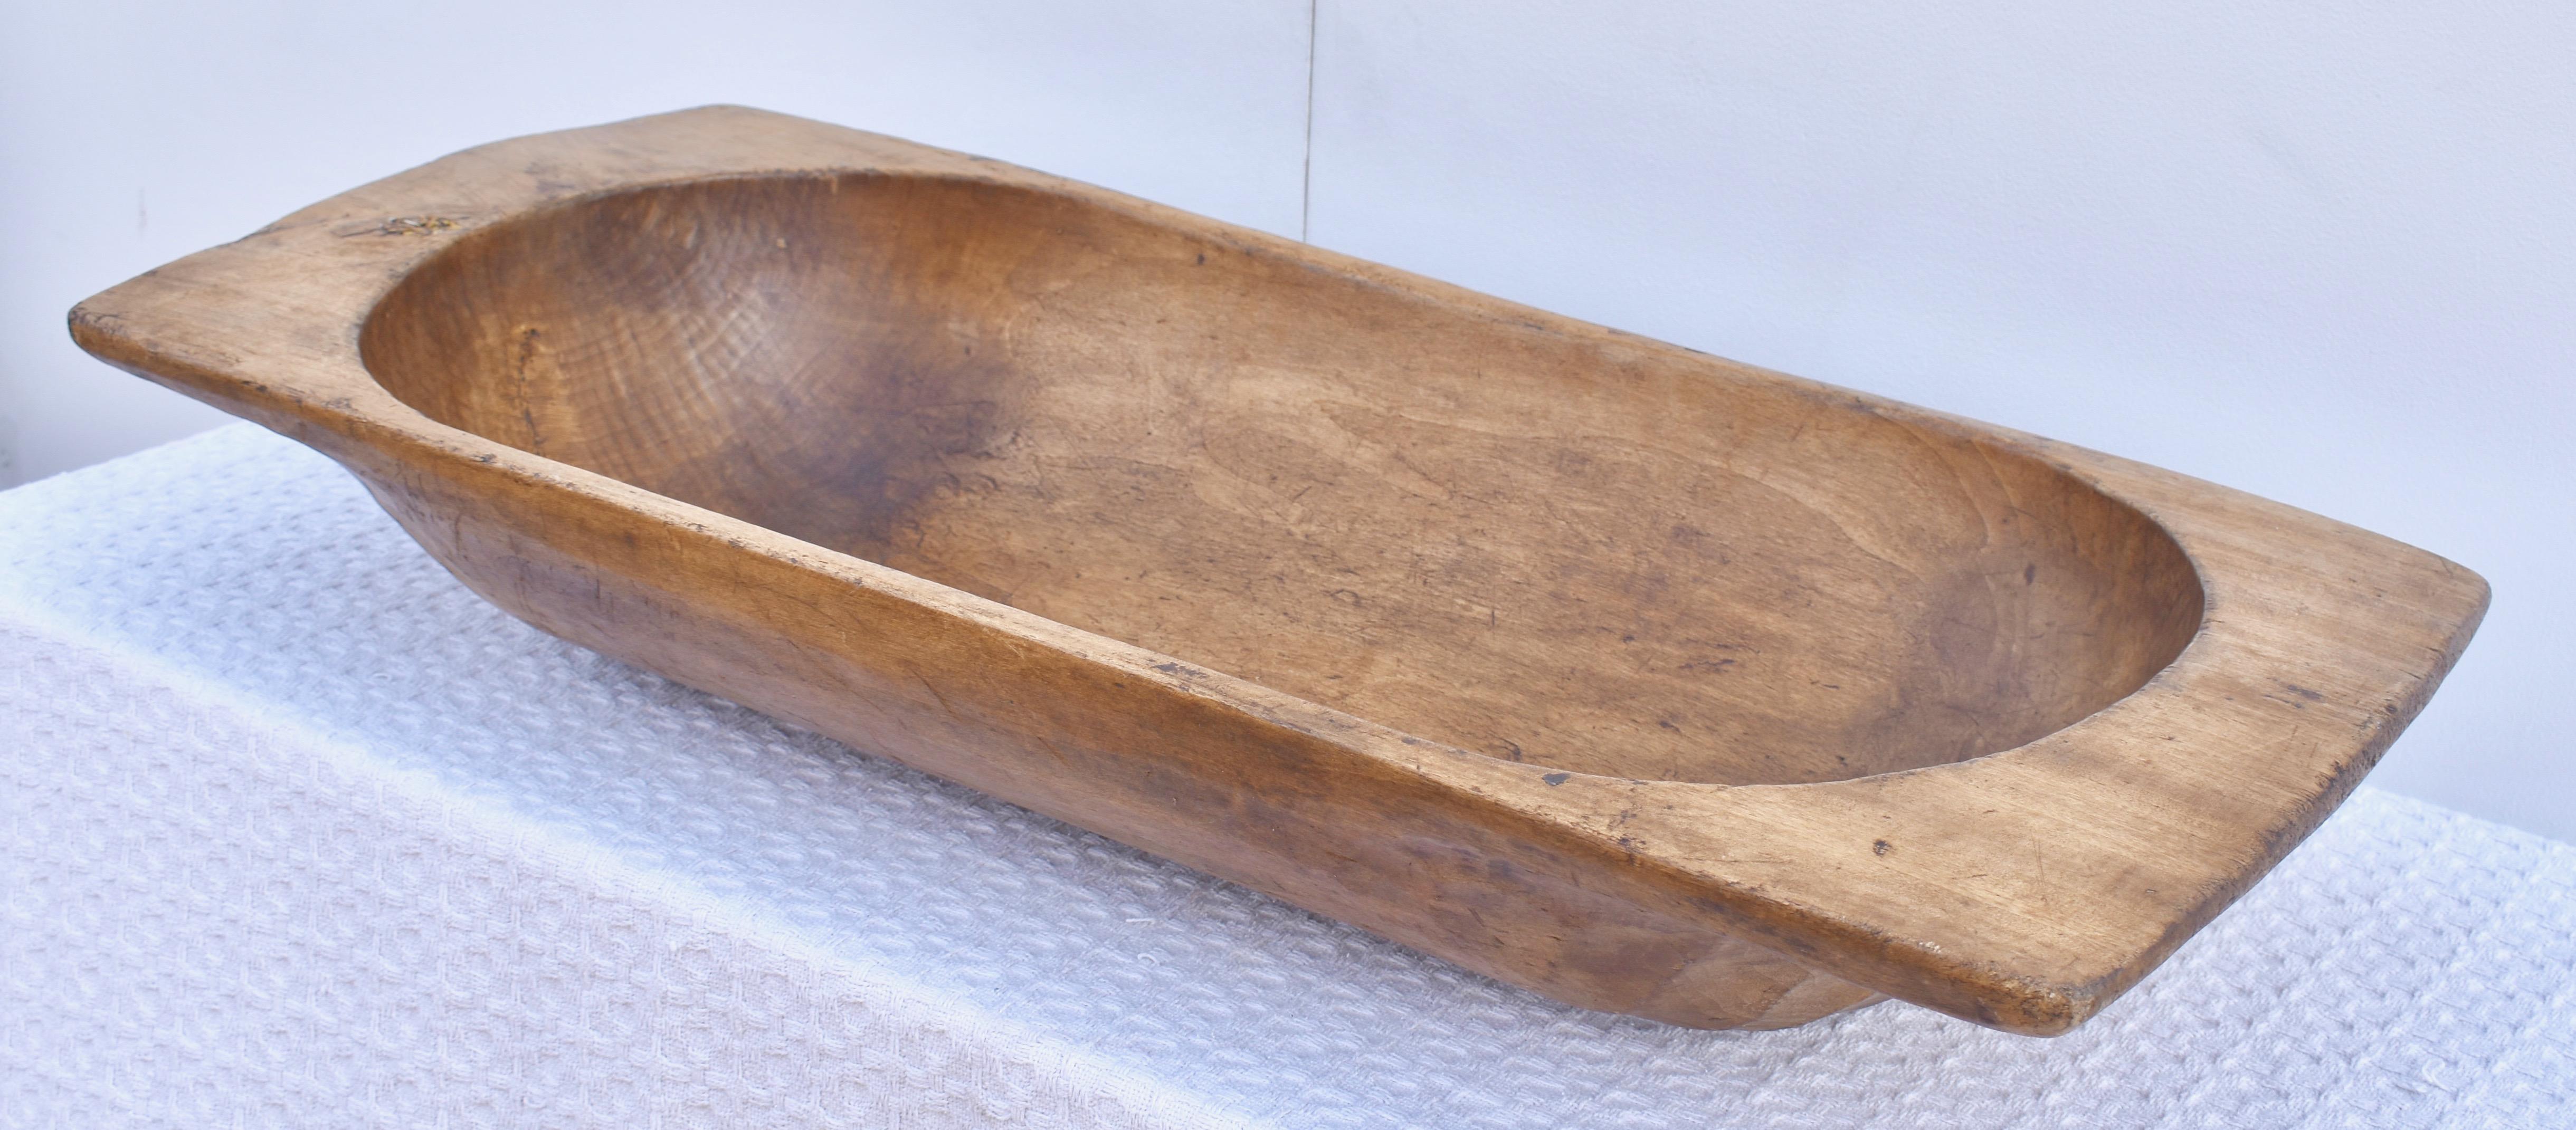 20th Century Hand-Hewn Fruitwood Trog or Dough Bowl